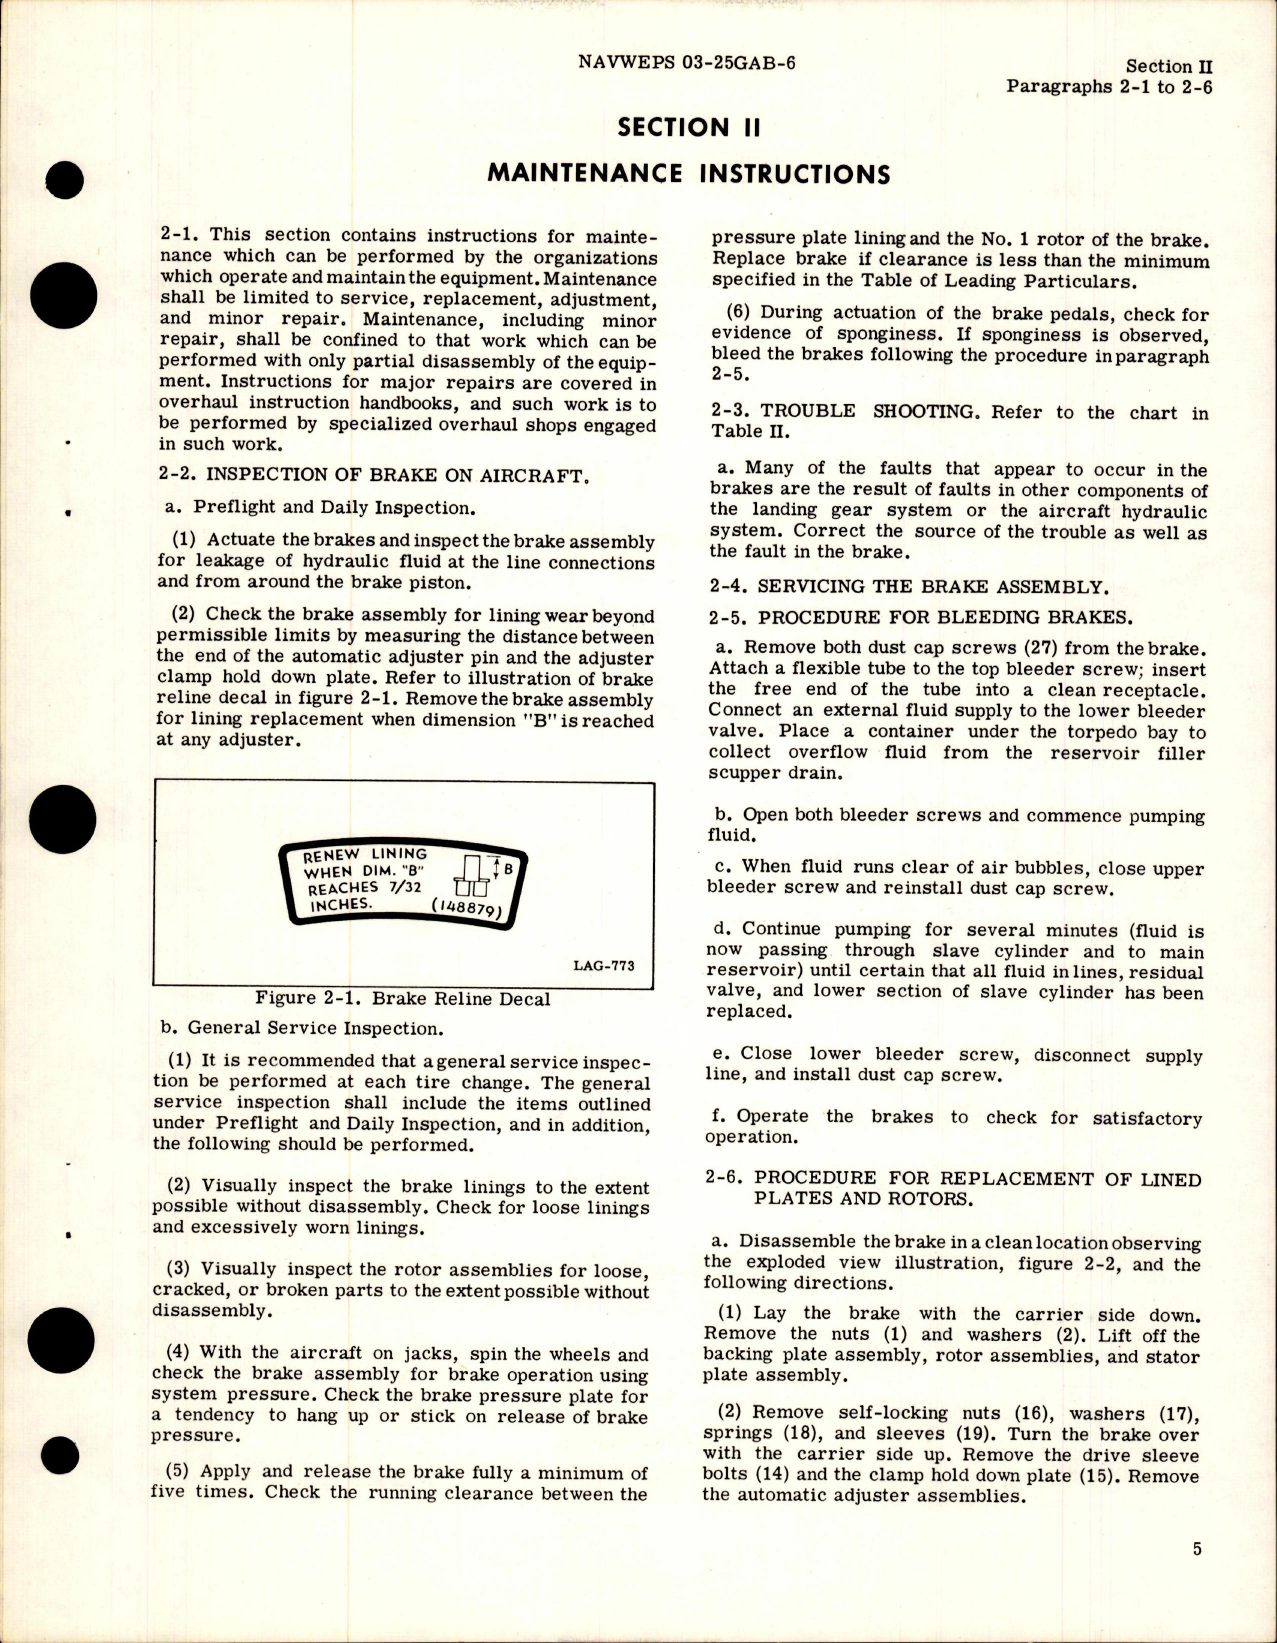 Sample page 9 from AirCorps Library document: Operation and Maintenance for Main Landing Gear Brake Assemblies